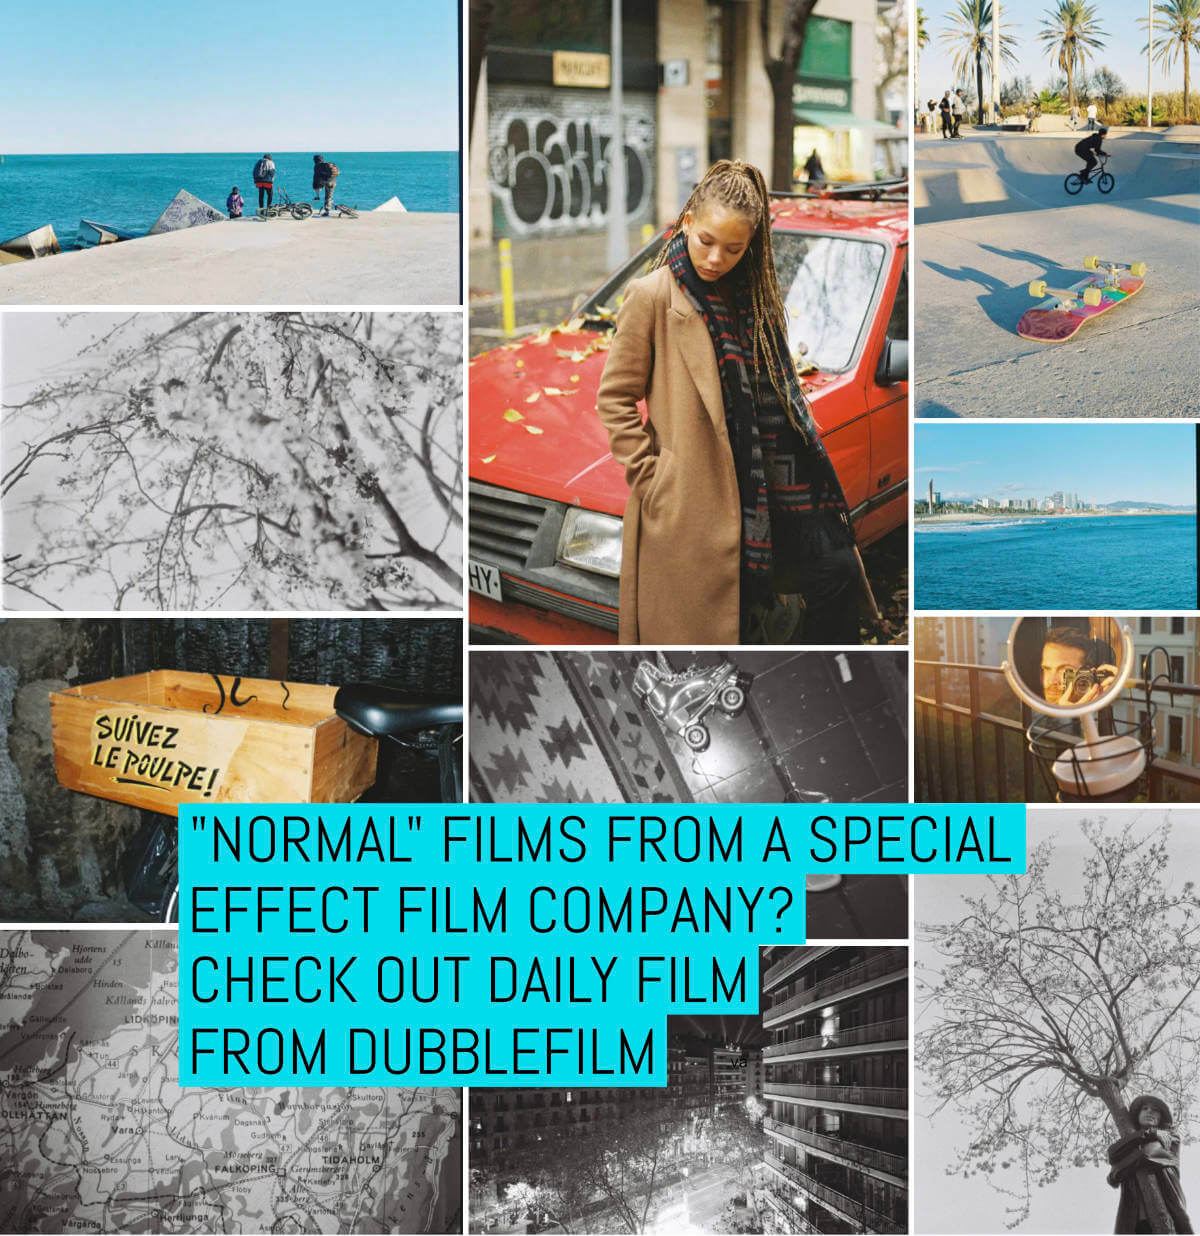 “Normal” films from a special effect film company? Check out DAILY film from dubblefilm